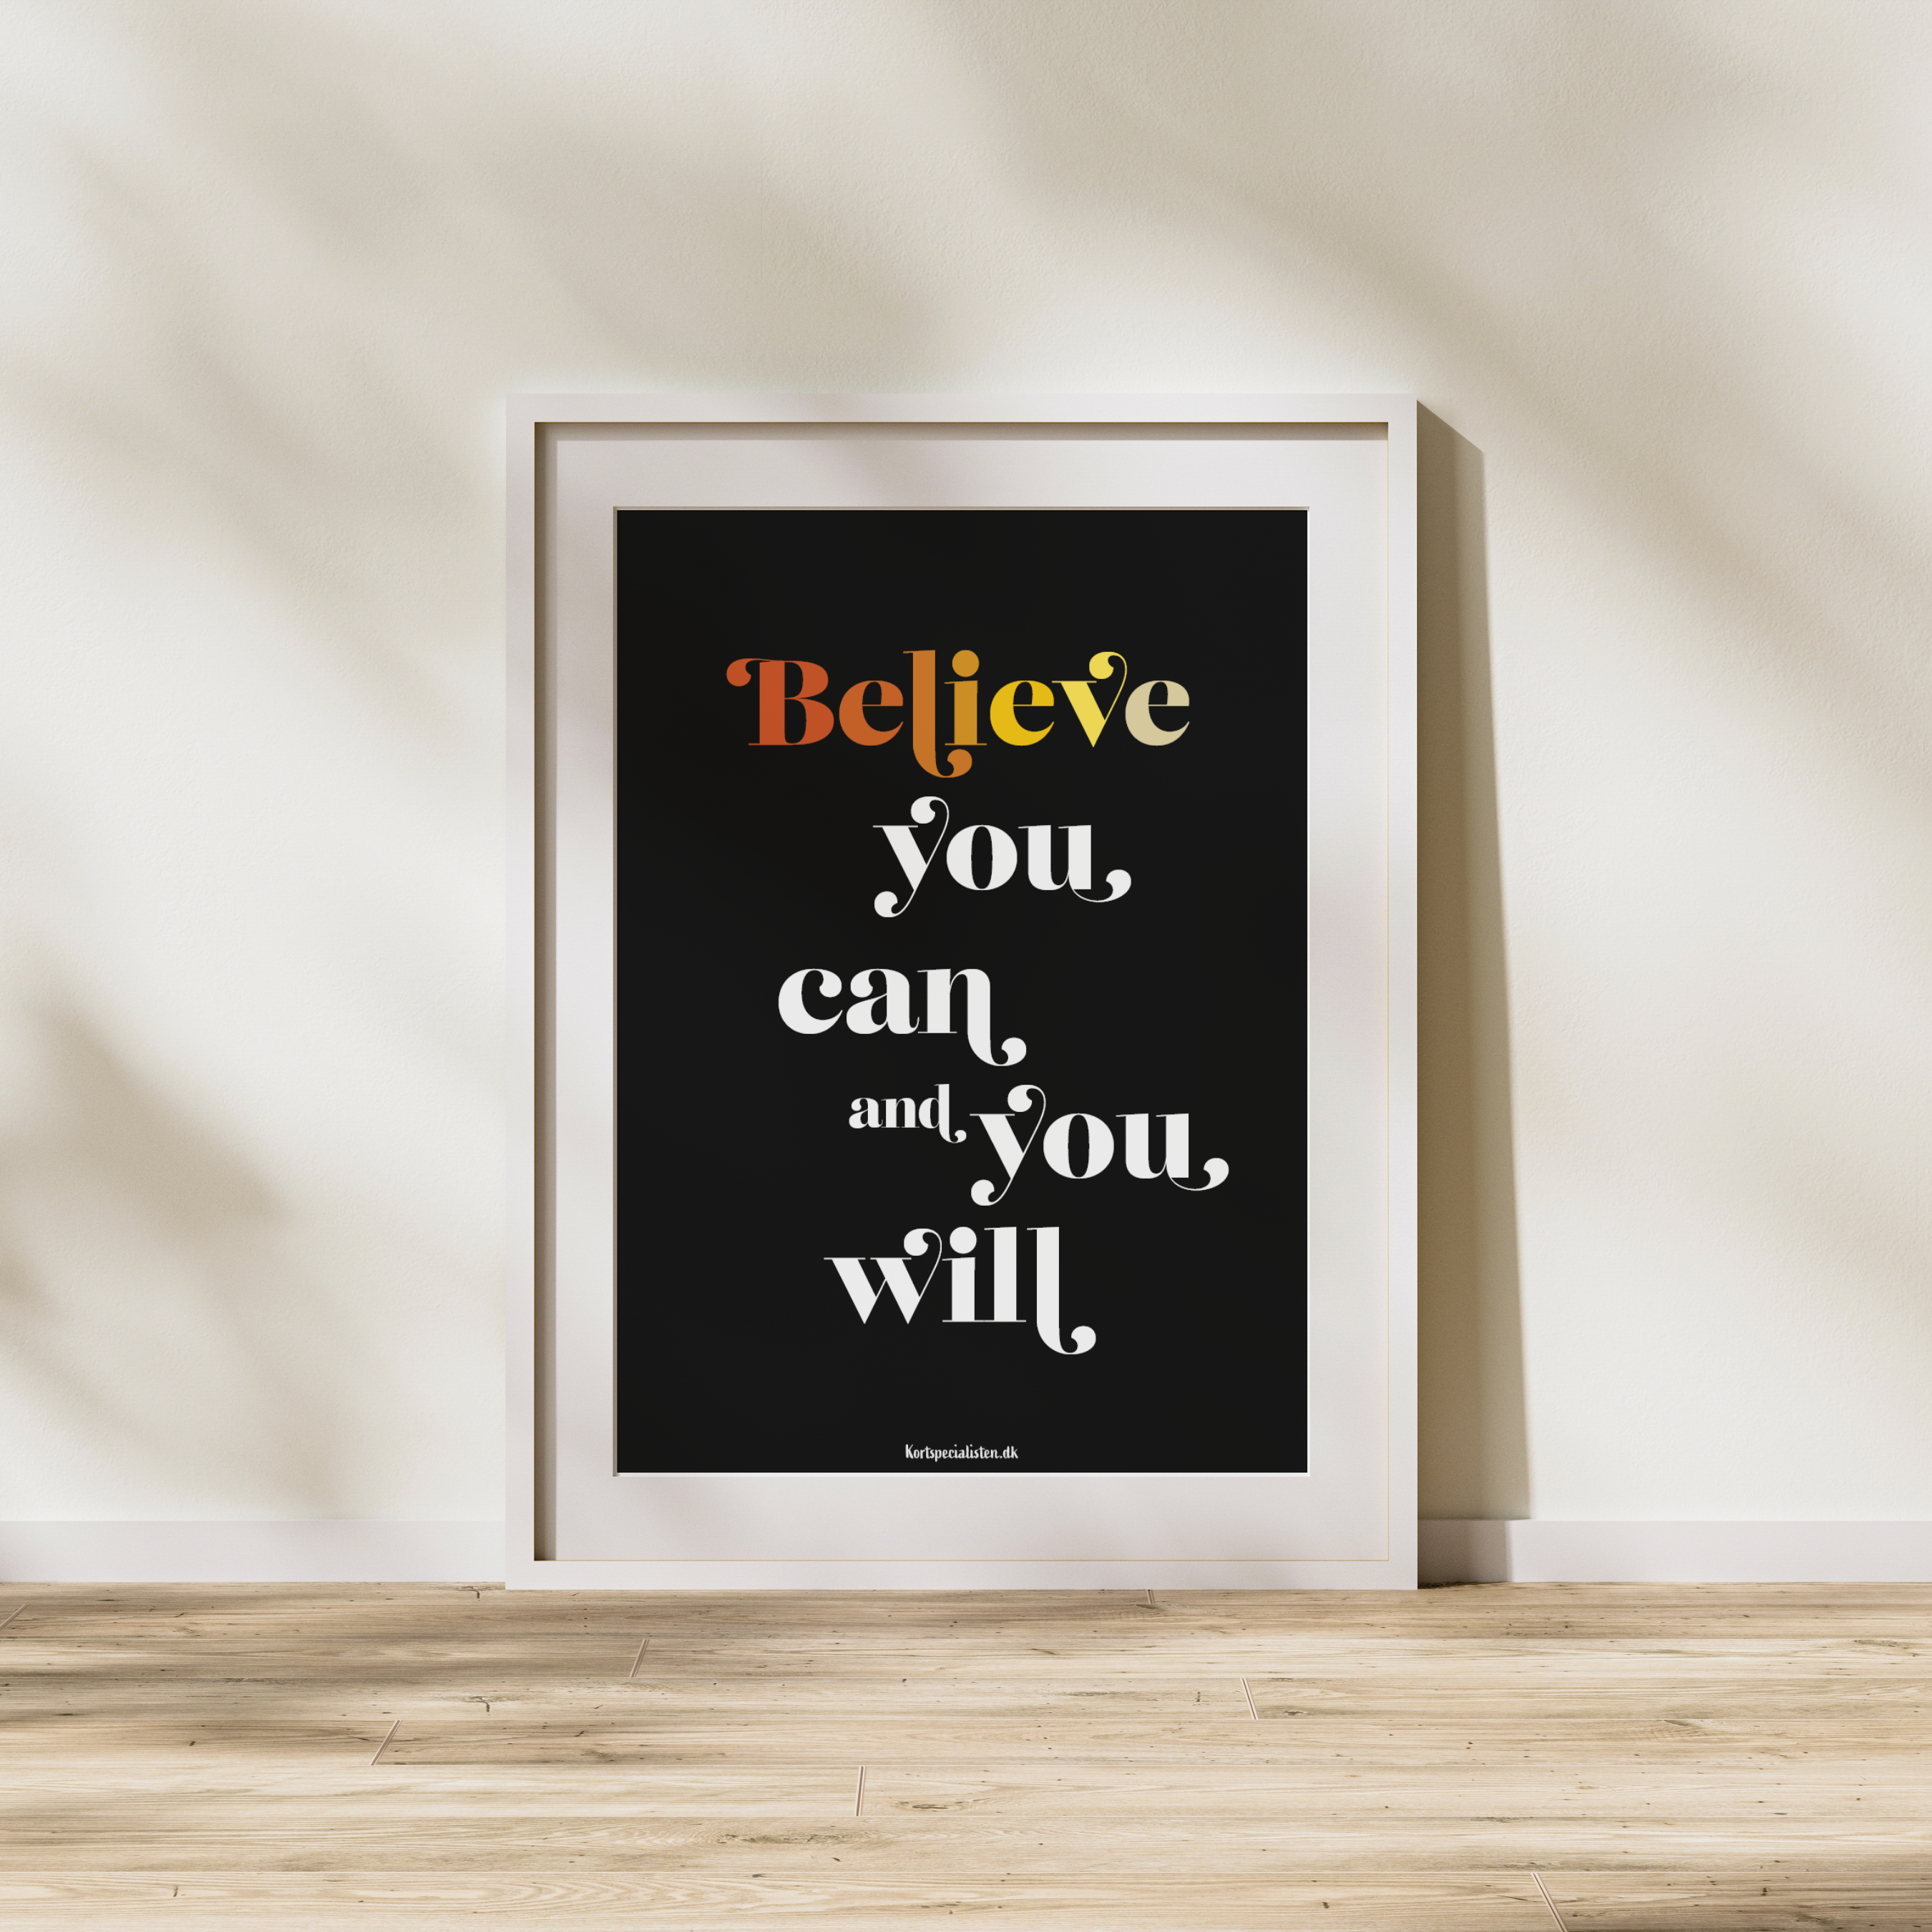 Believe You Can - Plakat